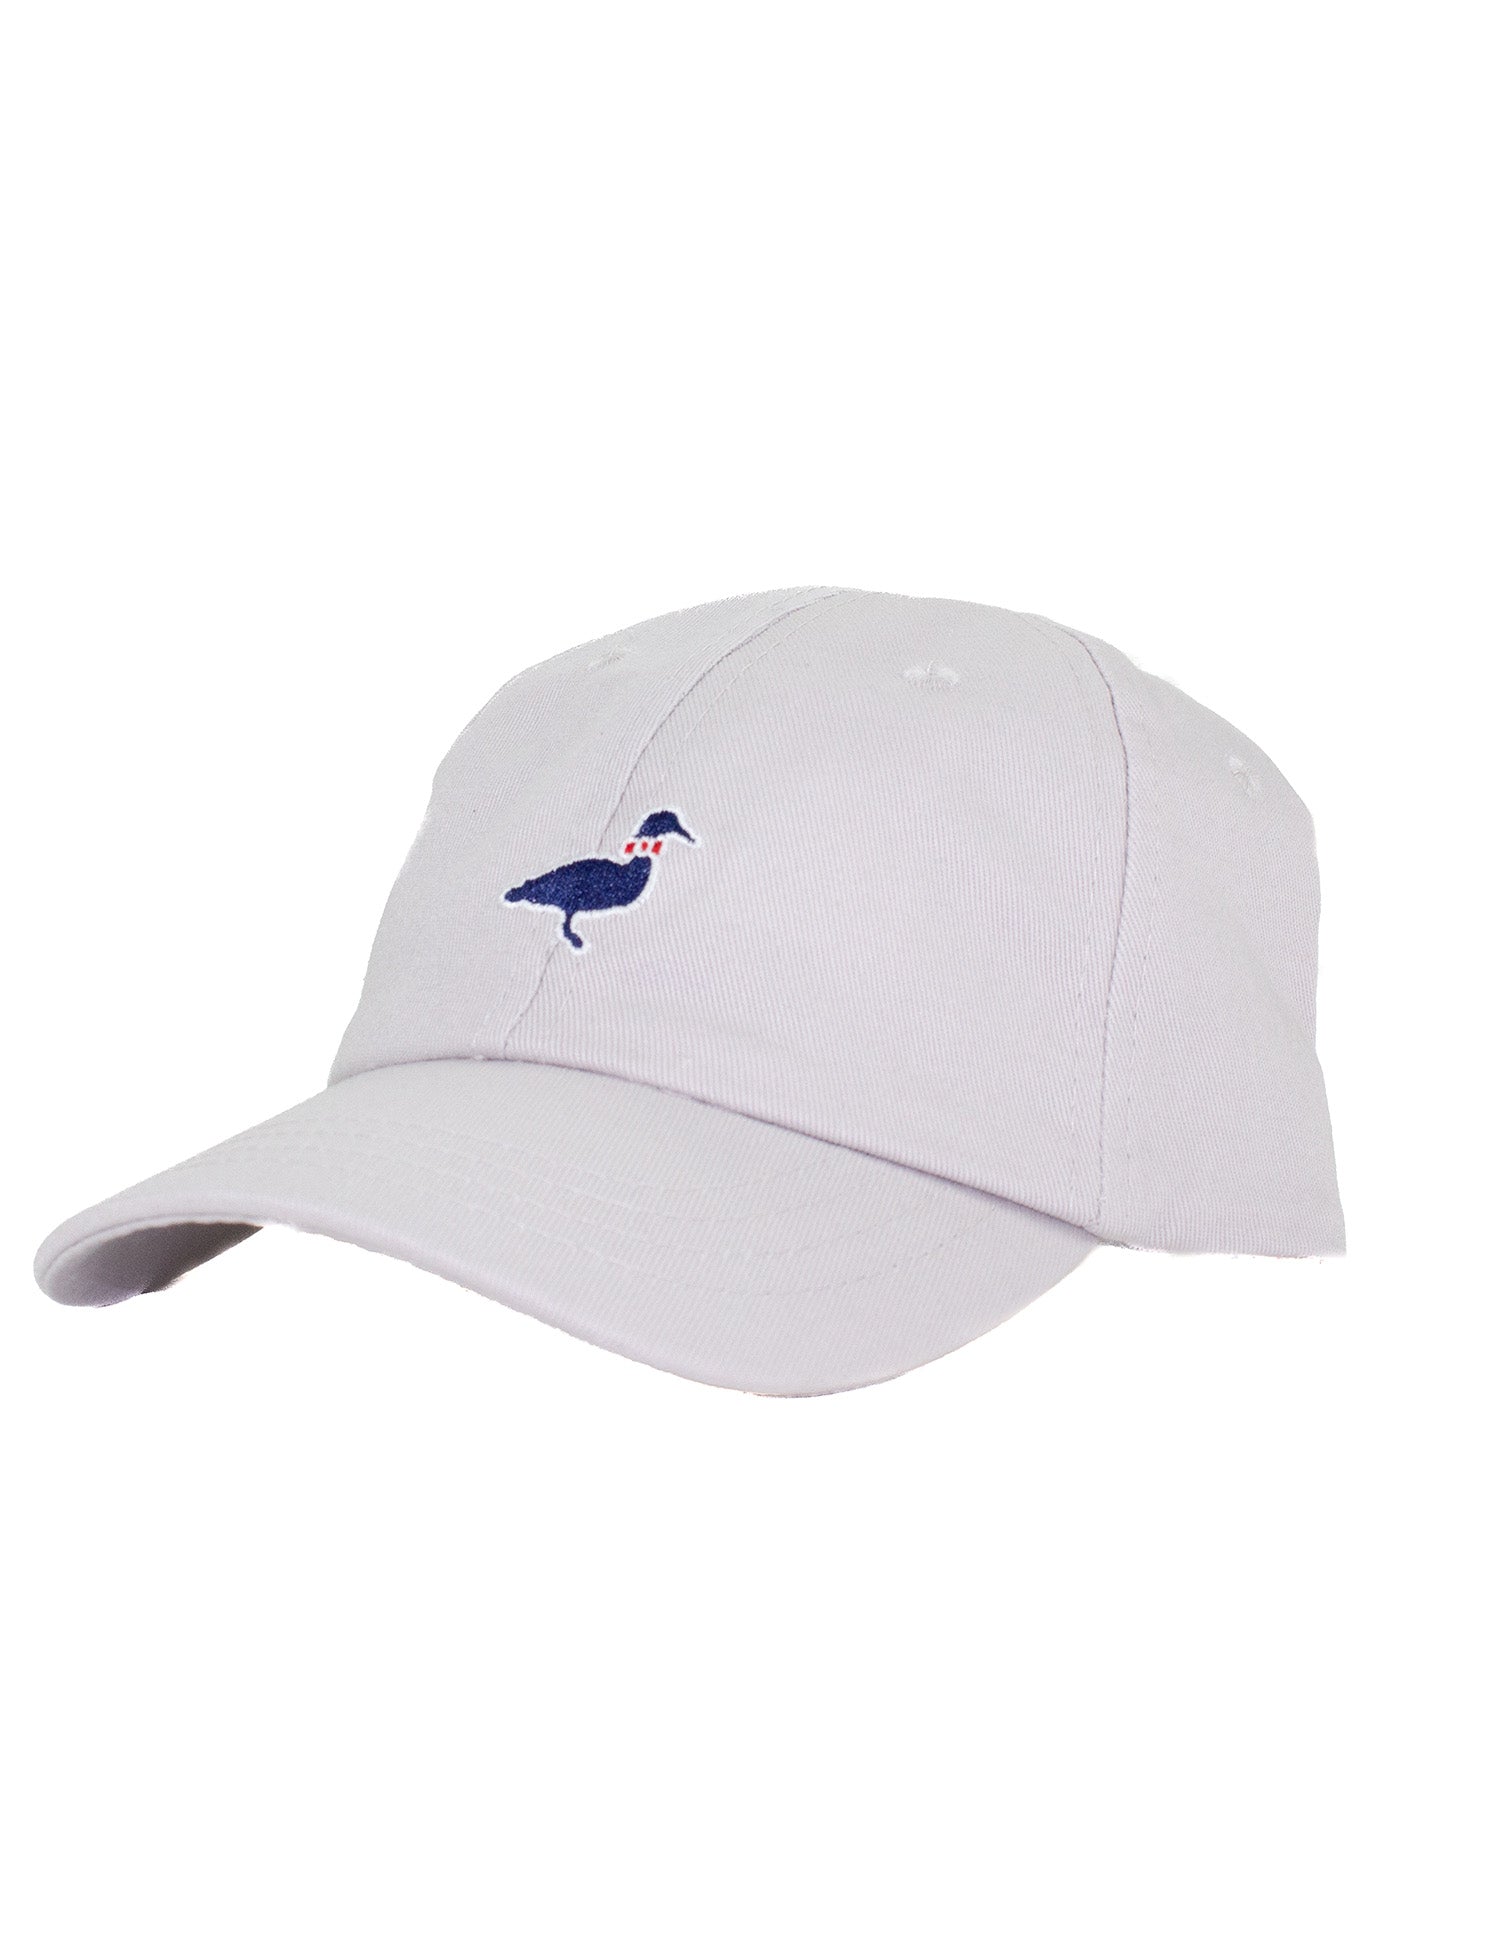 Youth Cotton Hat Chrome